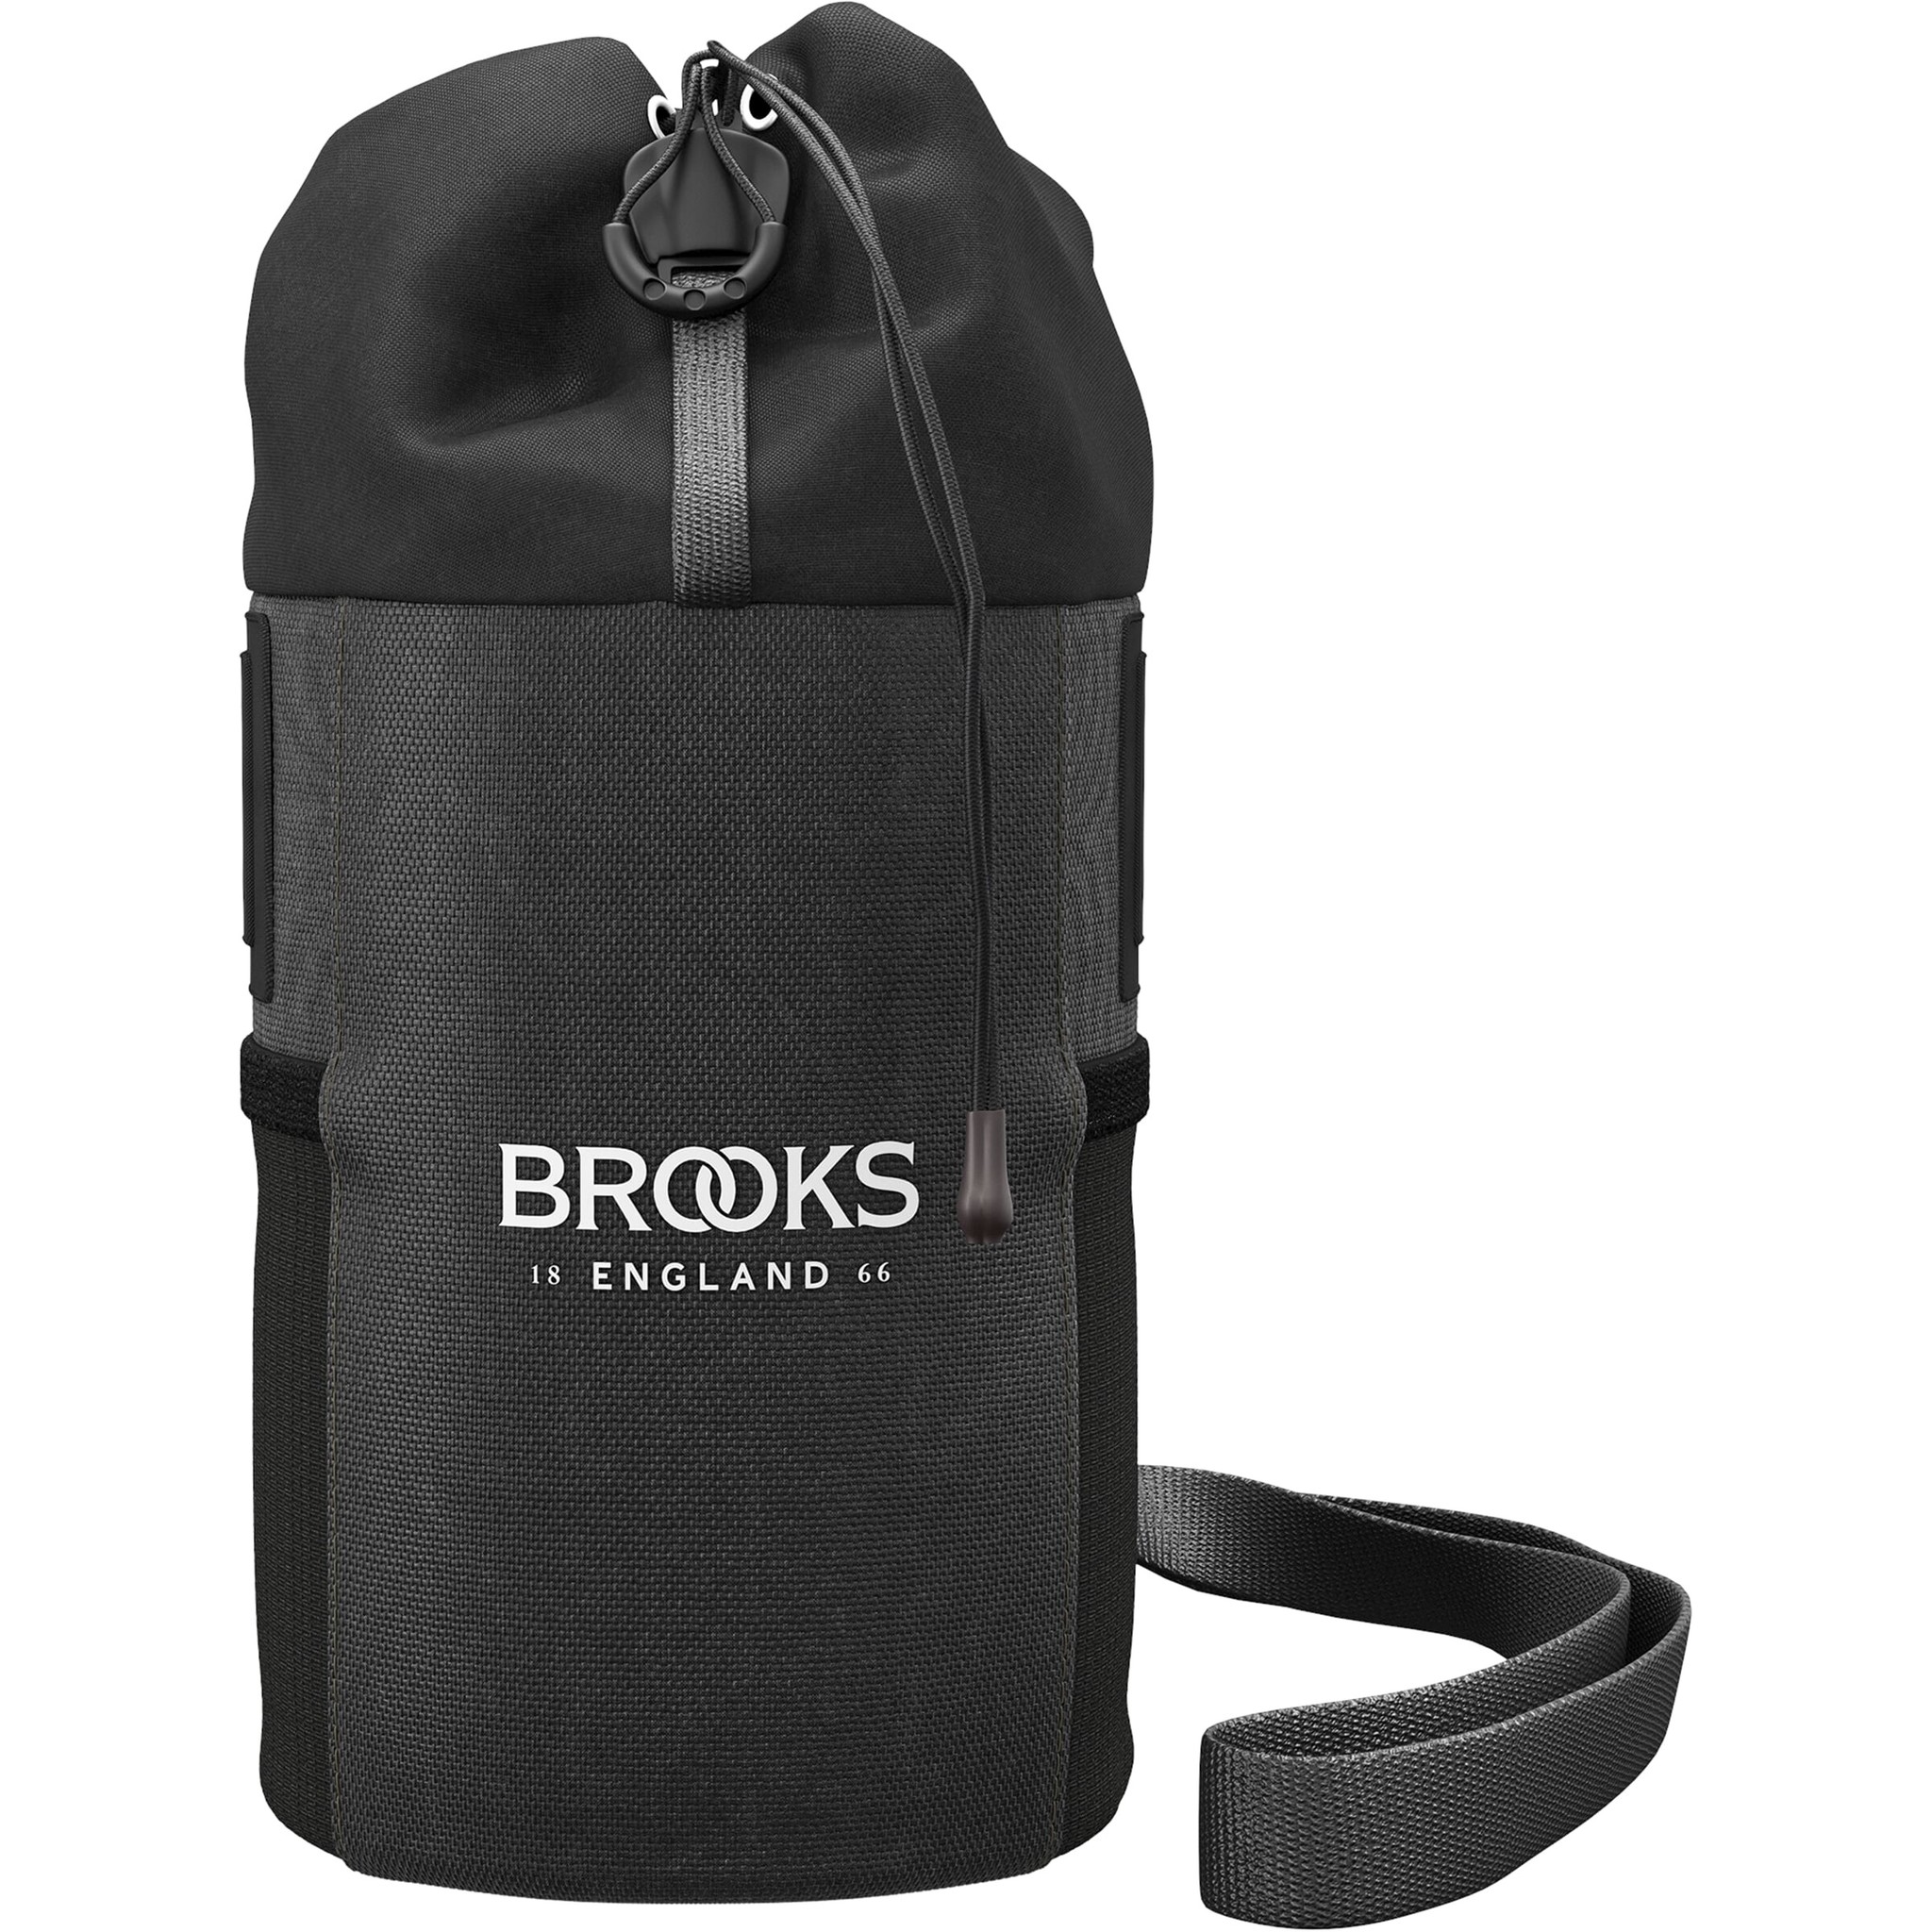 helling spanning slogan Brooks tas Scape Feed Pouch - Superfietsen.nl